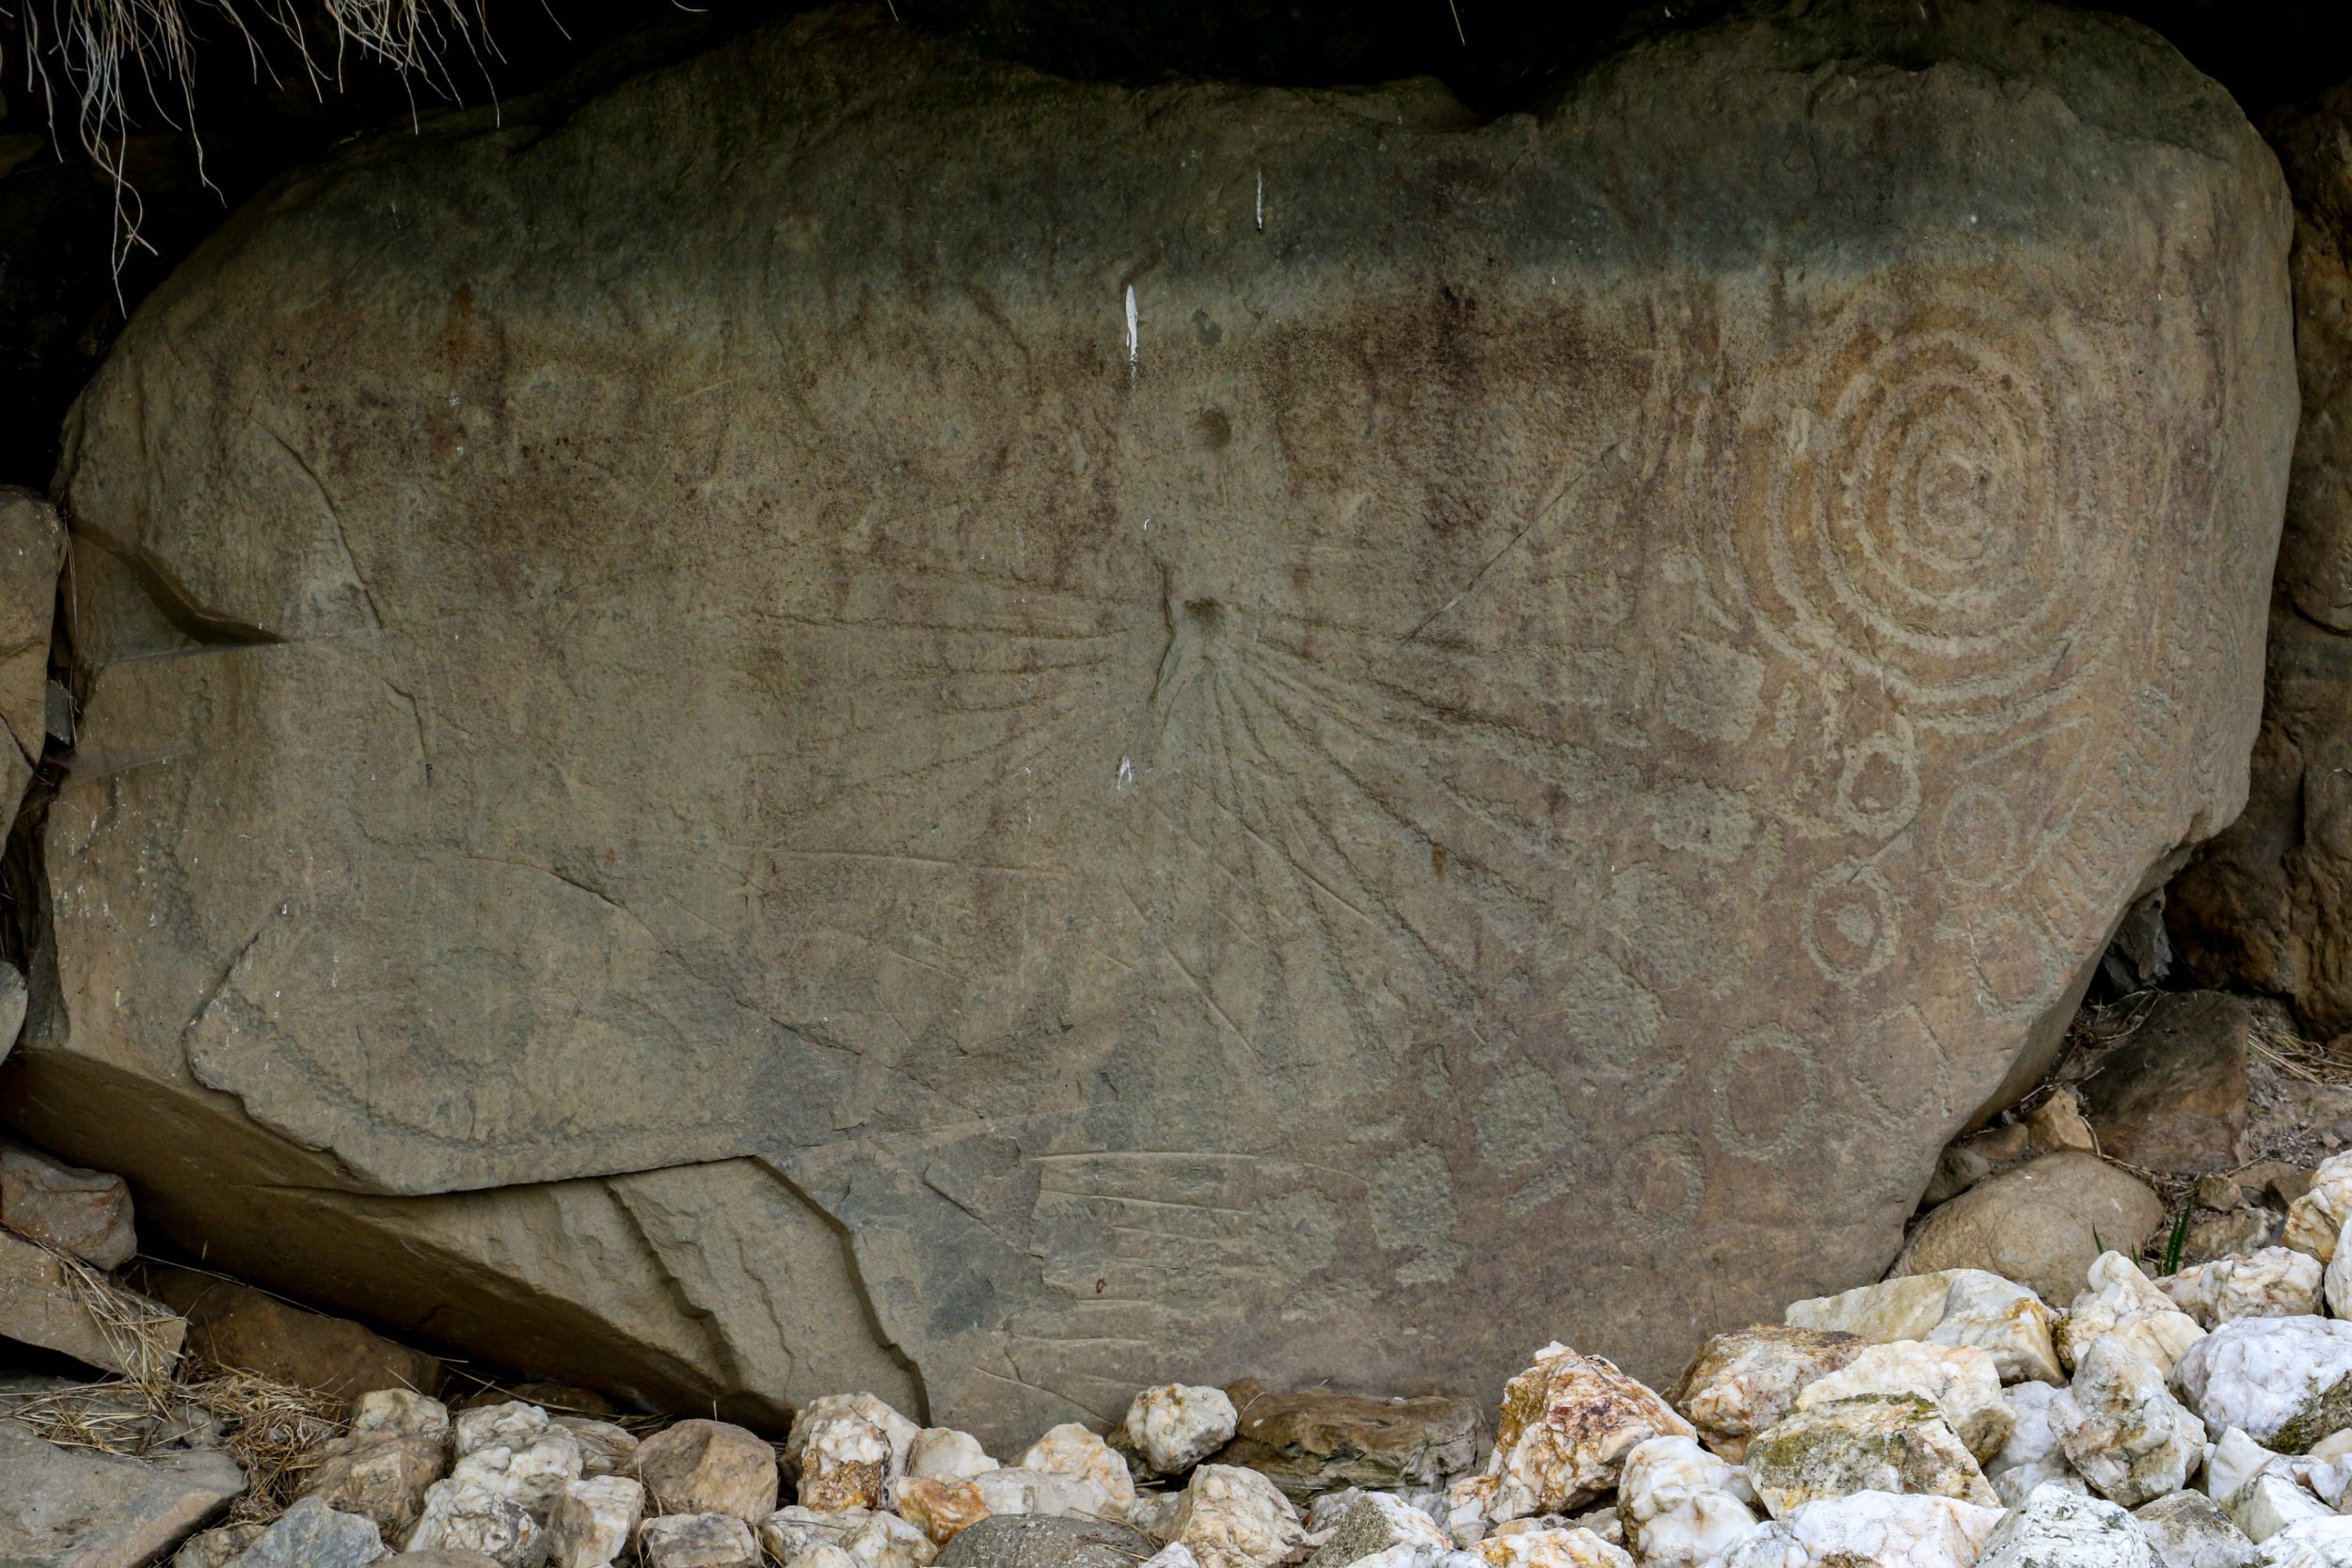 A kerbstone engraved with solar and lunar symbols at the Knowth megalithic tomb in Ireland